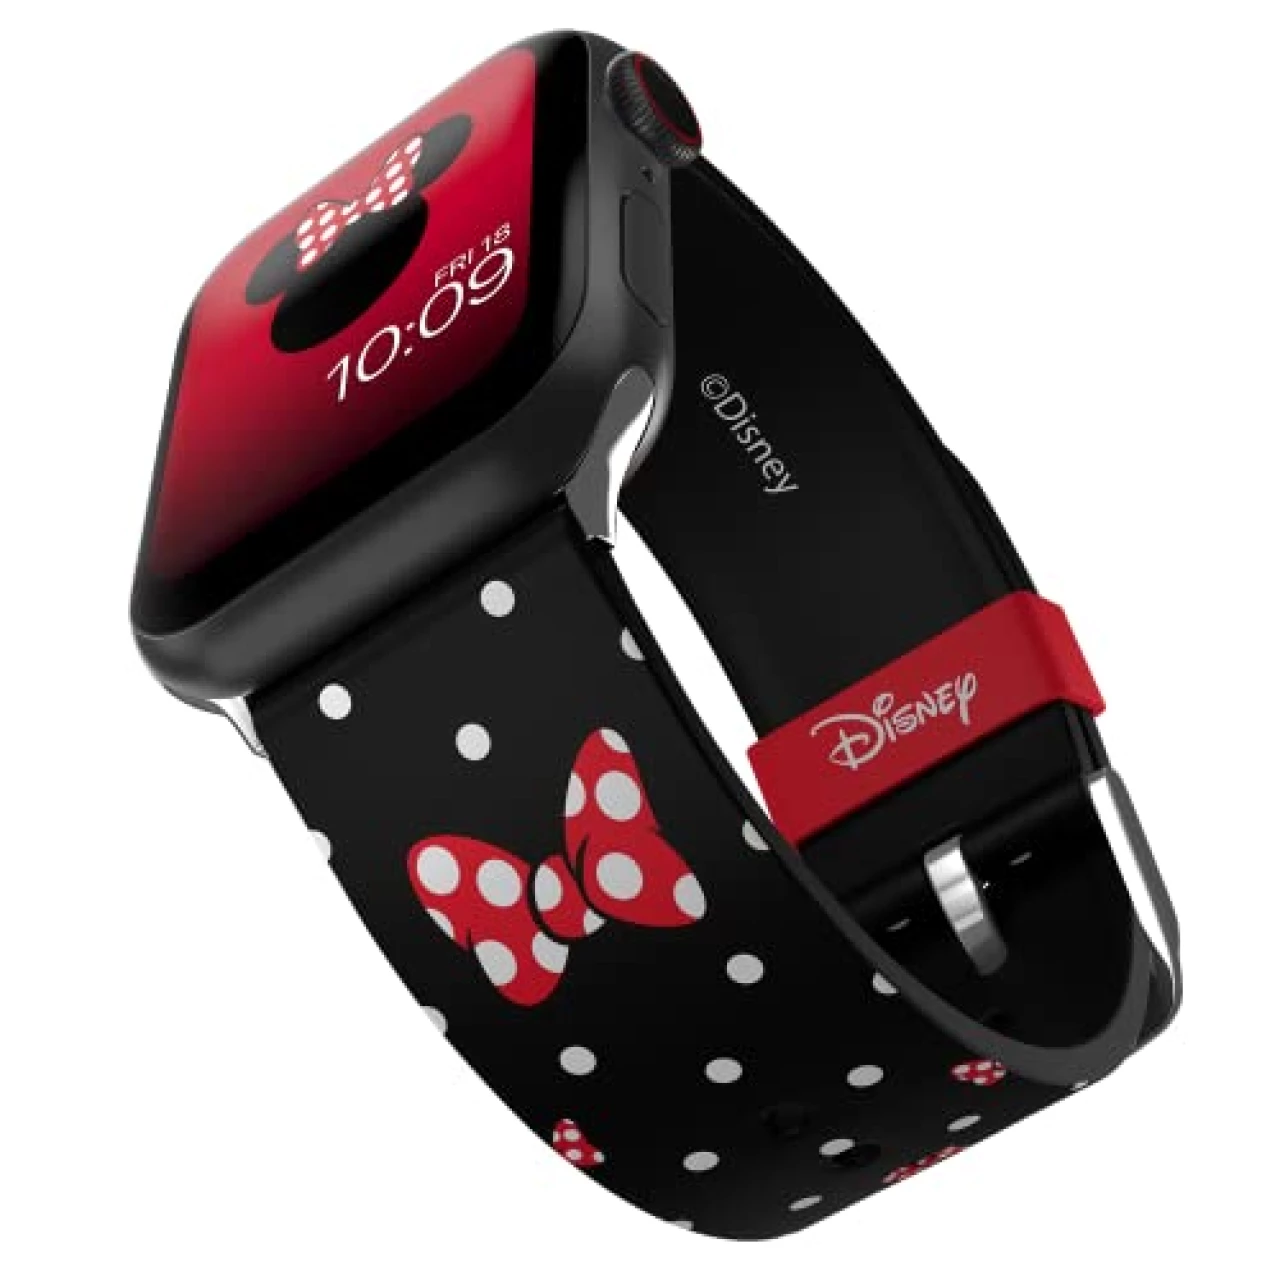 Disney – Minnie Mouse Polka Noir Smartwatch Band - Officially Licensed, Compatible with Every Size &amp; Series of Apple Watch (watch not included)